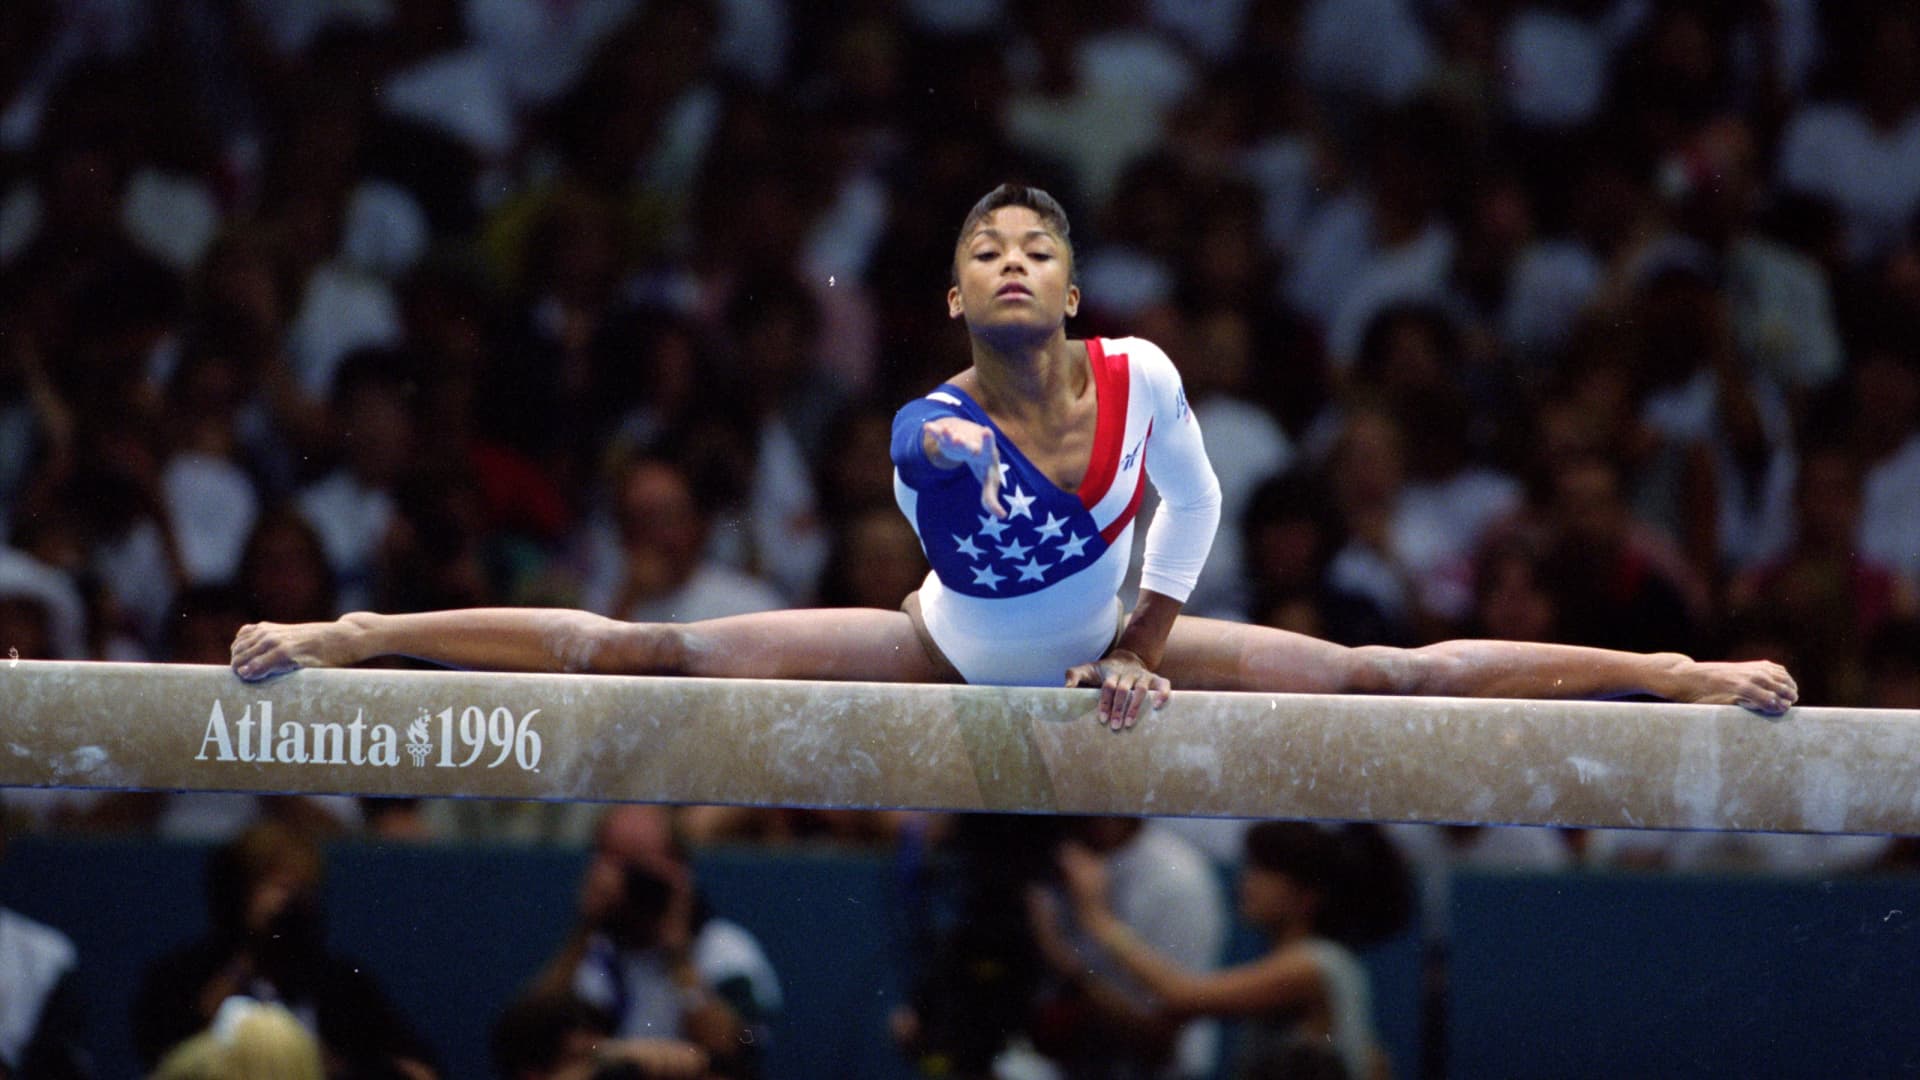 4-time Olympic medalist Dominique Dawes on how she defines success